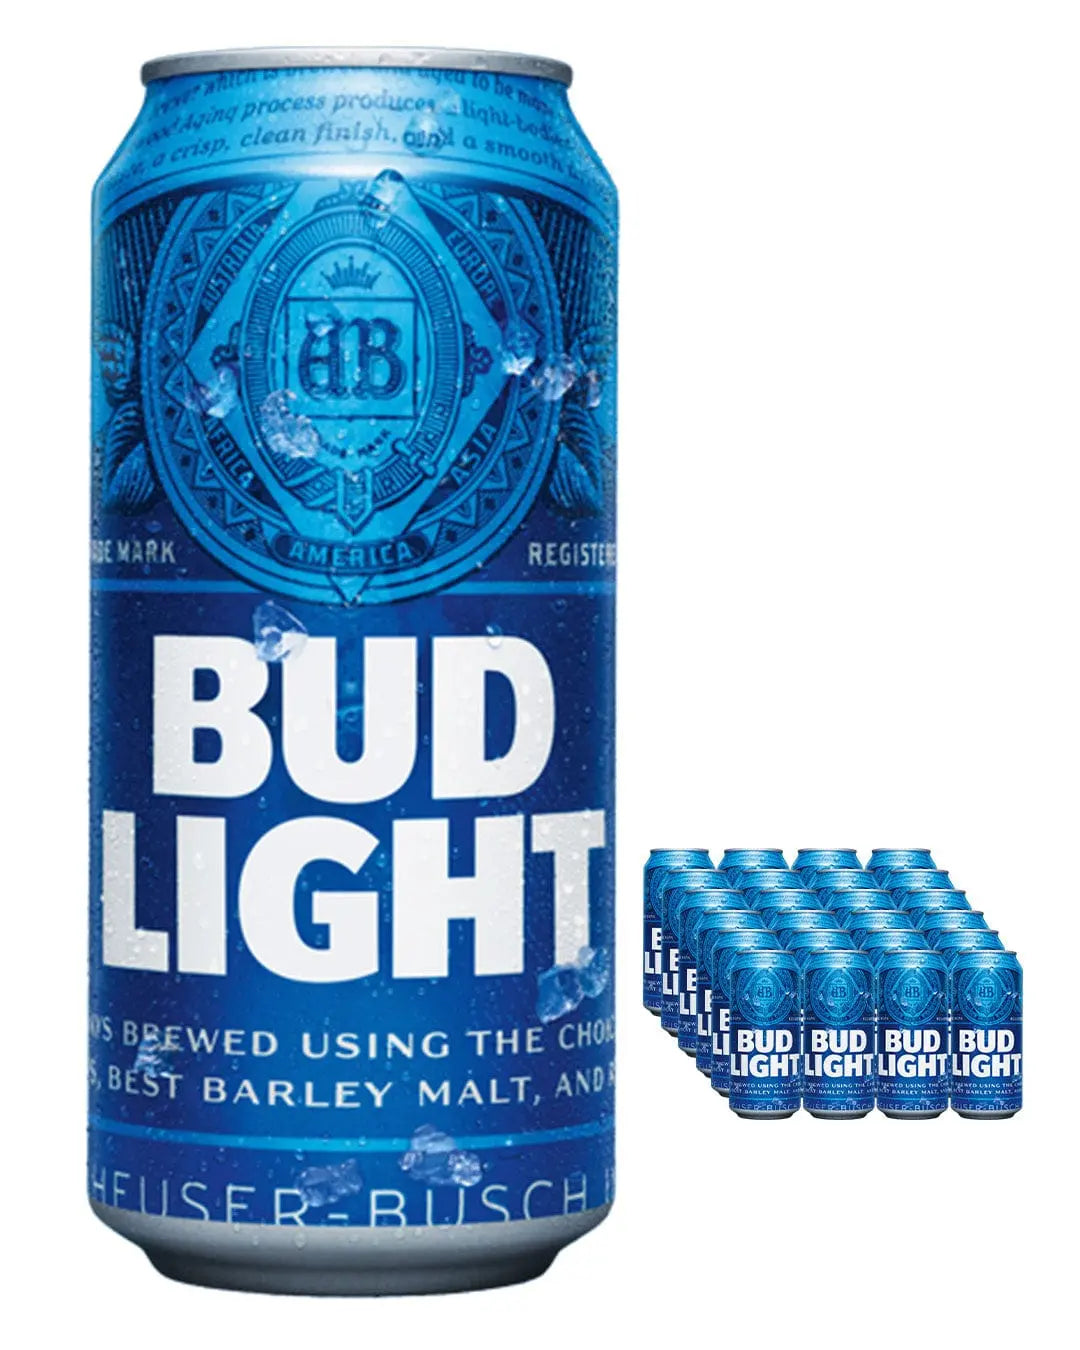 Bud Light Lager Beer Cans, 24 x 440 ml Beer